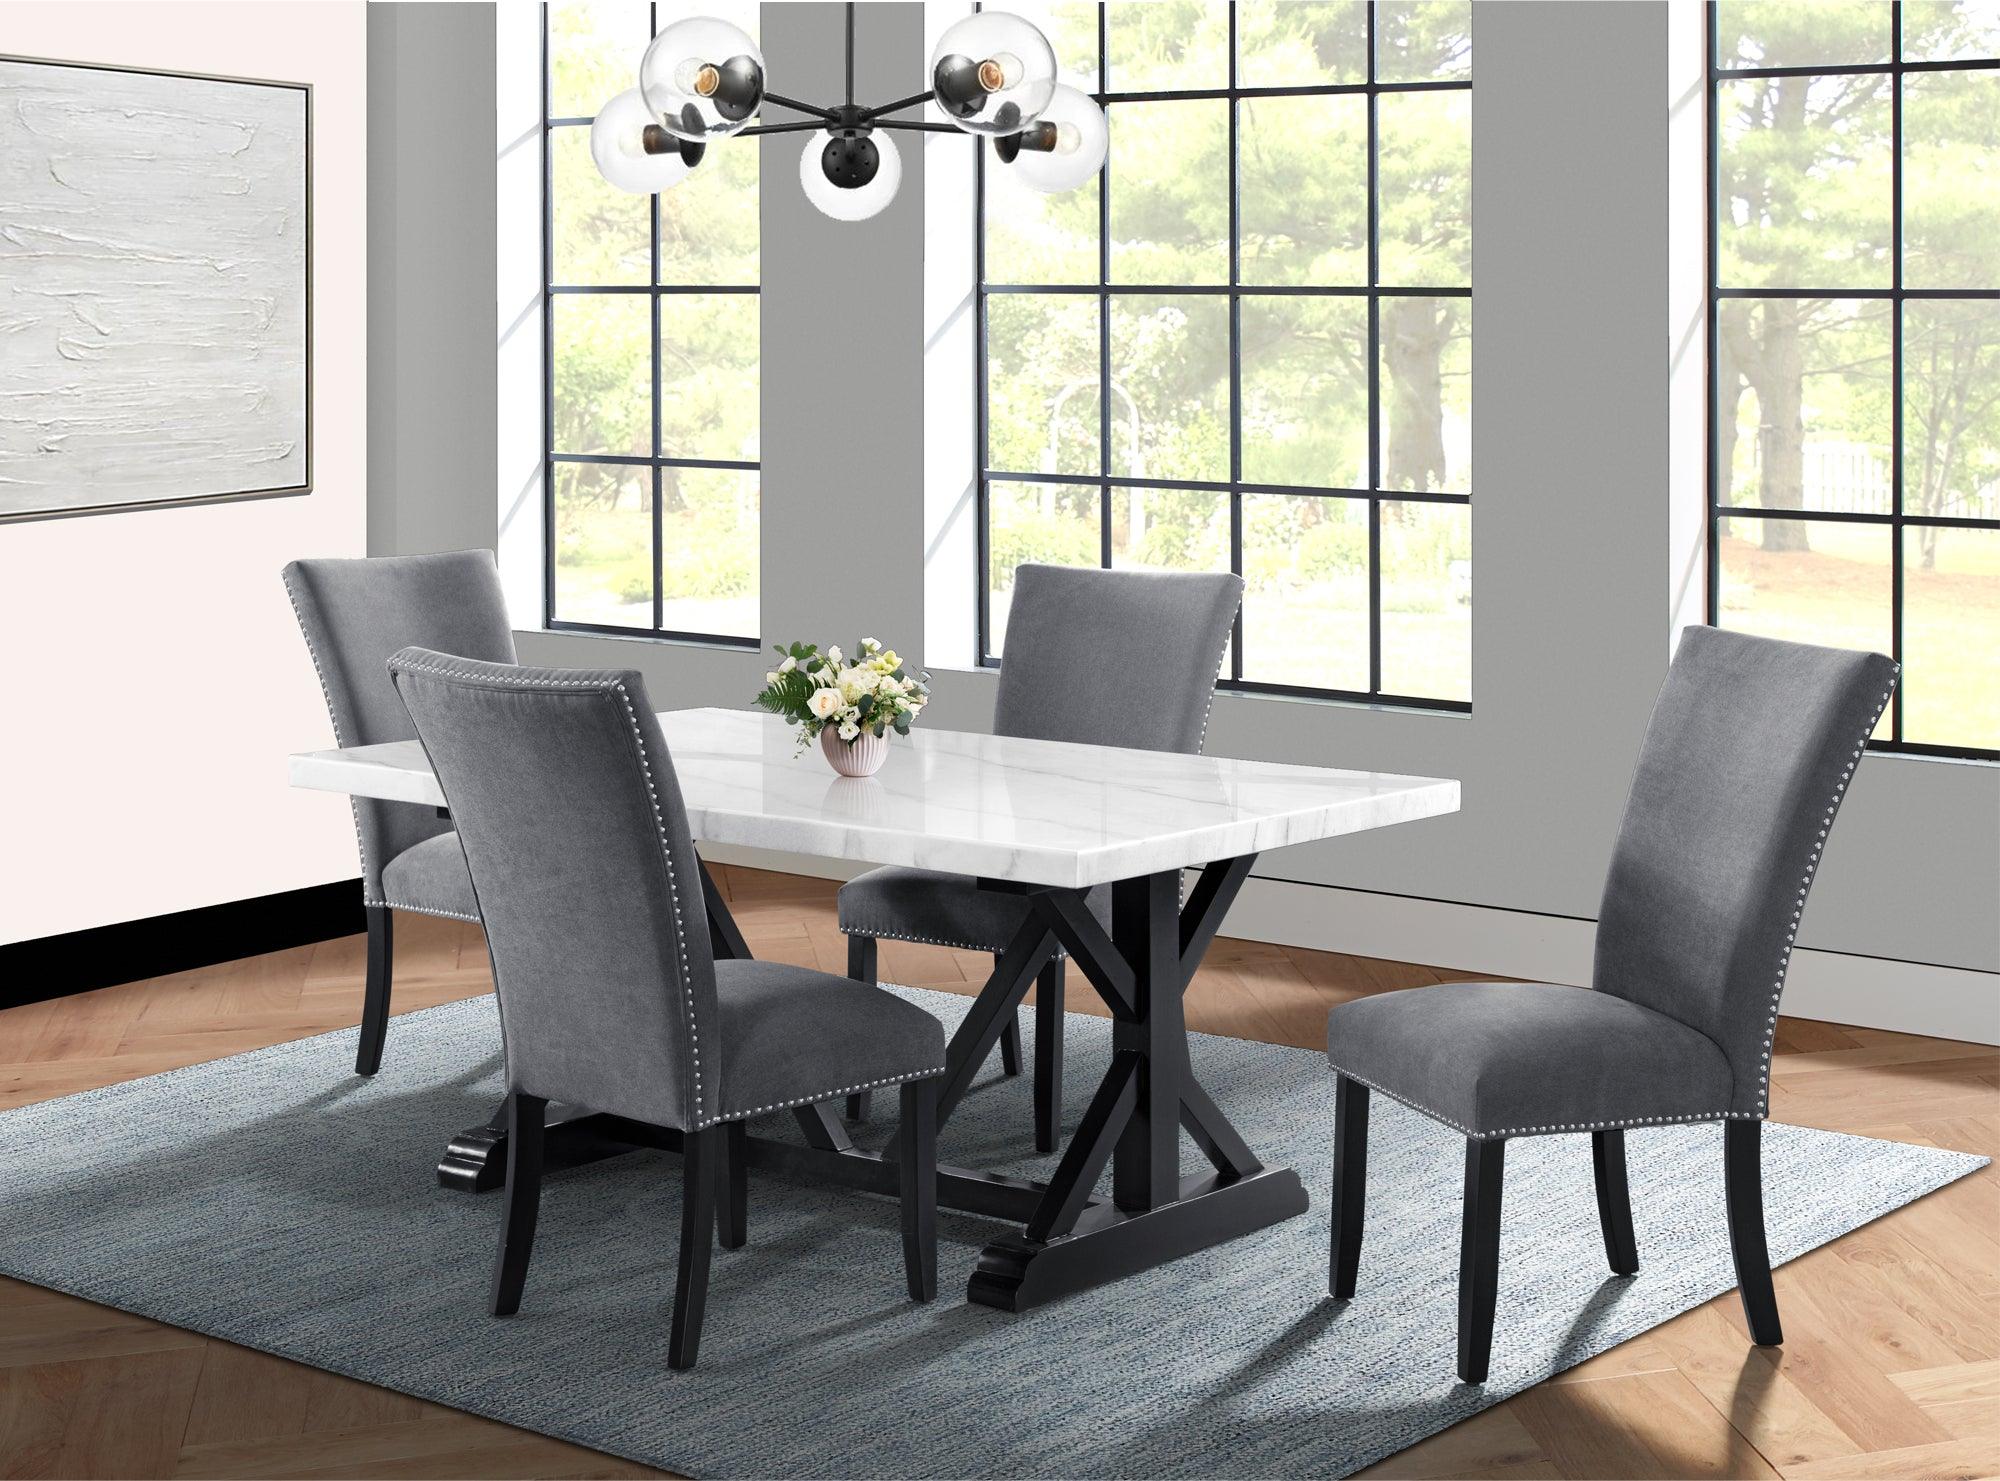 what is the standard height of a dining room table